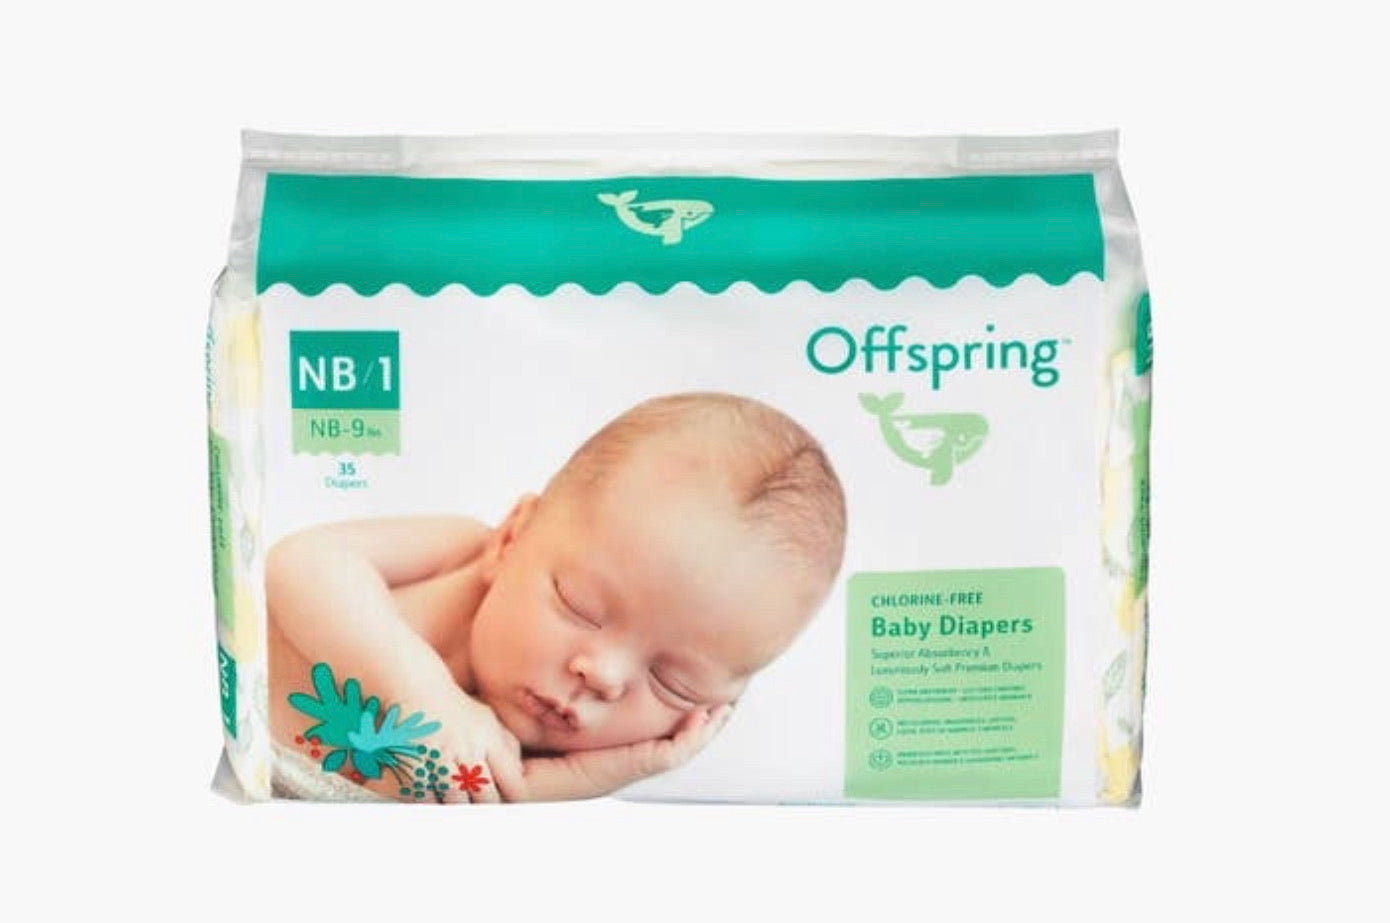 Offspring Chlorine Free Baby Diapers